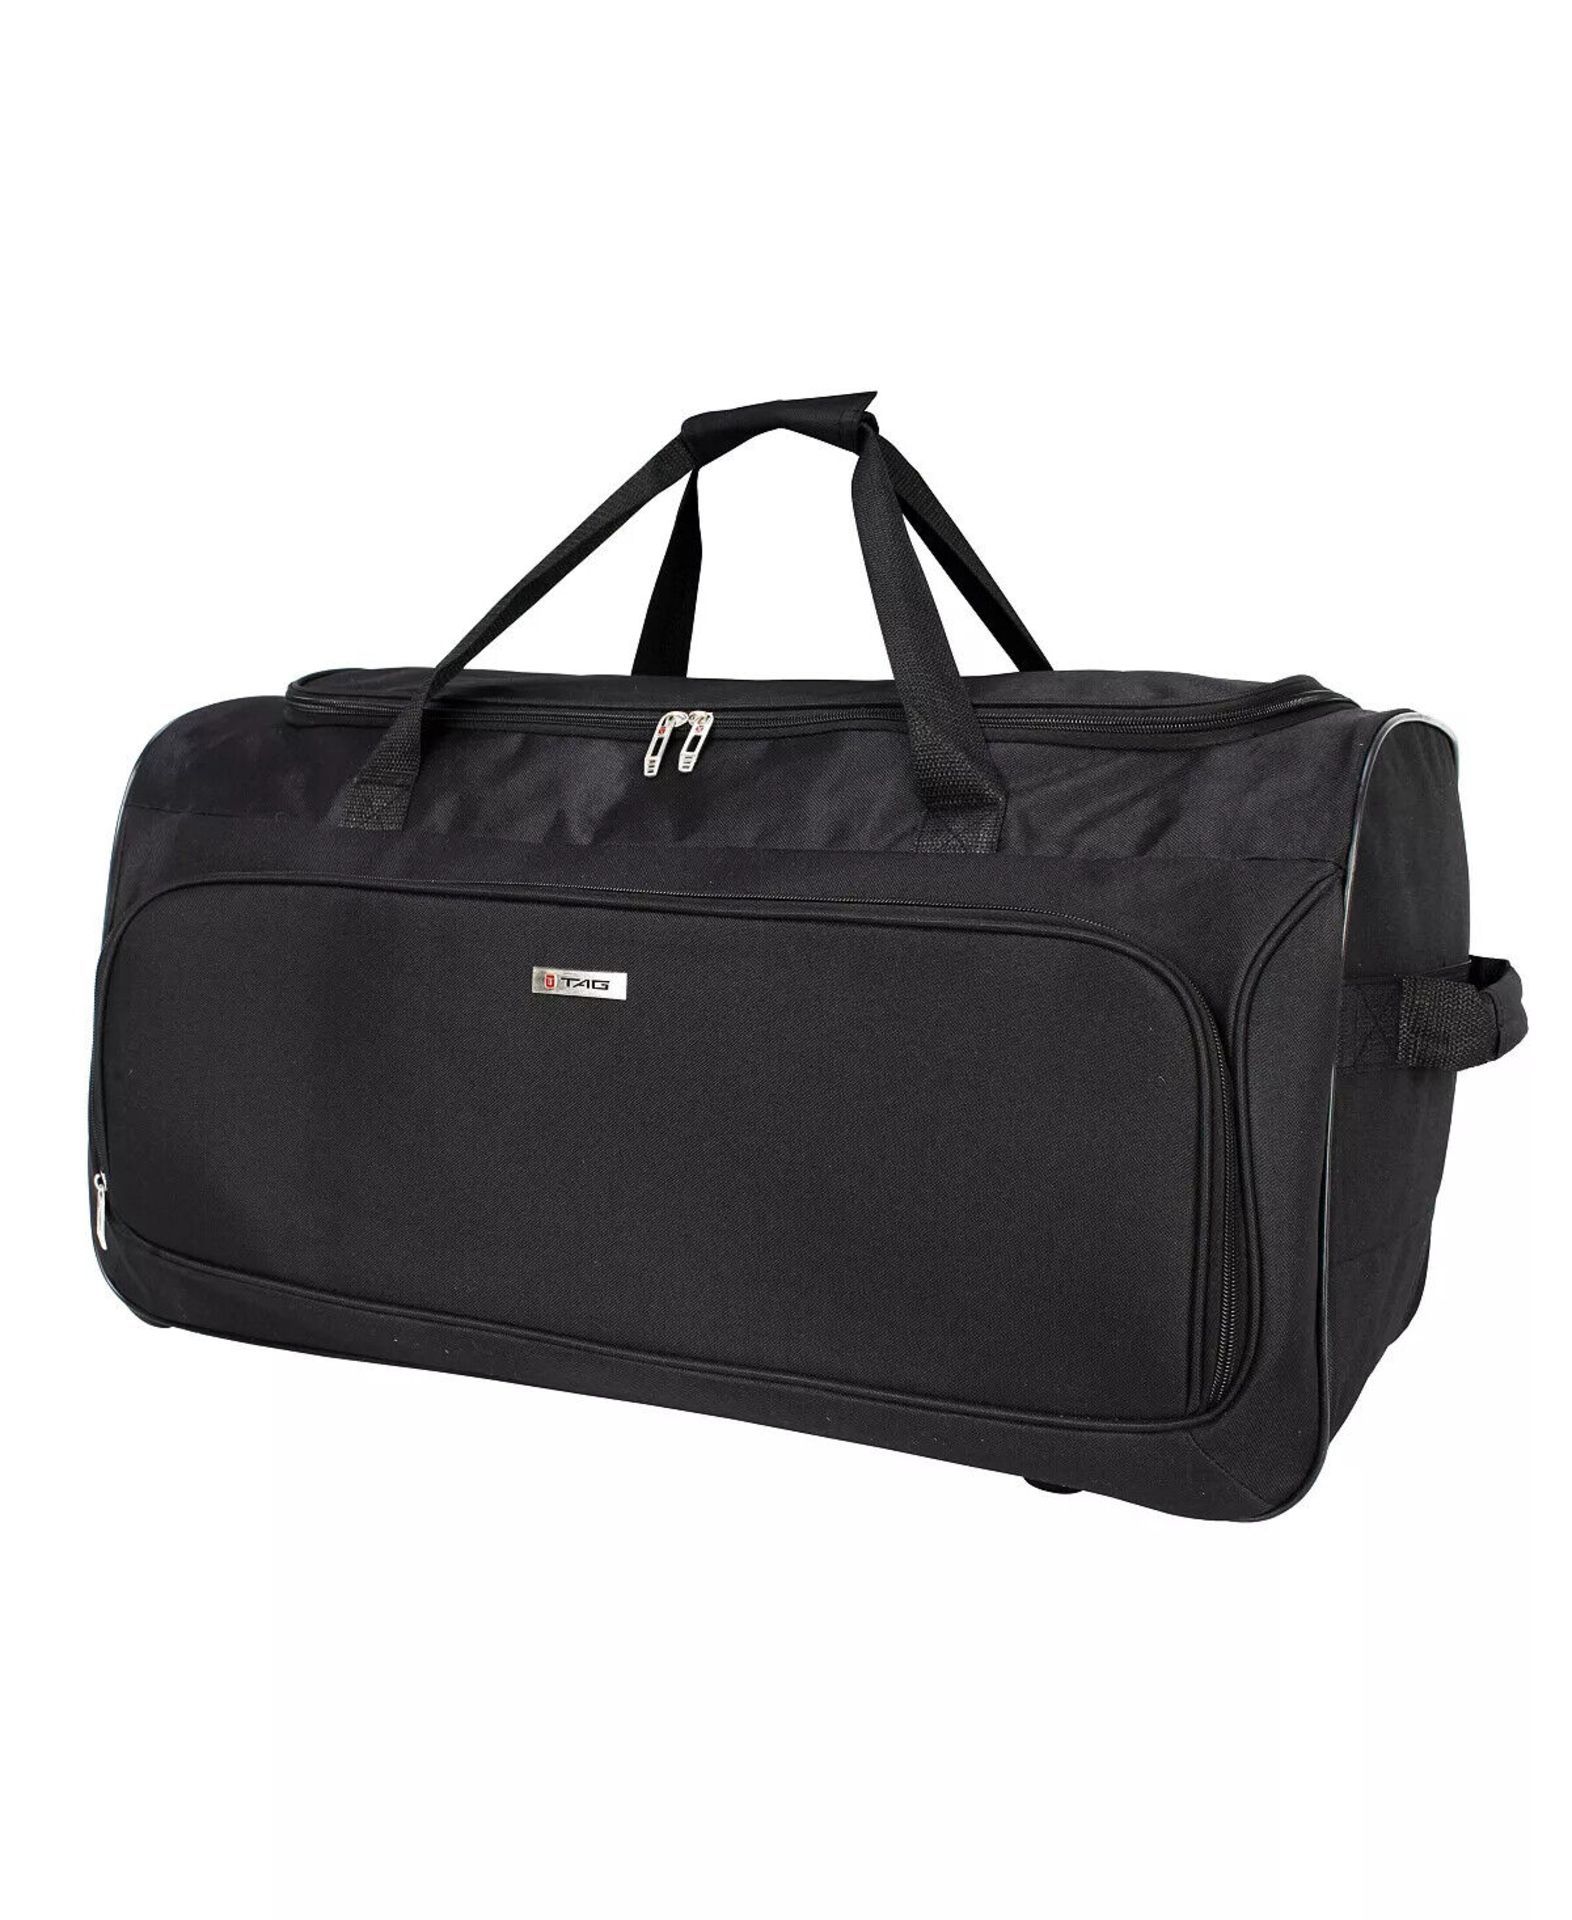 3 X NEW SETS OF TAG Ridgefield Black 5 Piece Softside Luggage Sets. RRP $300 per set, giving this - Image 3 of 4